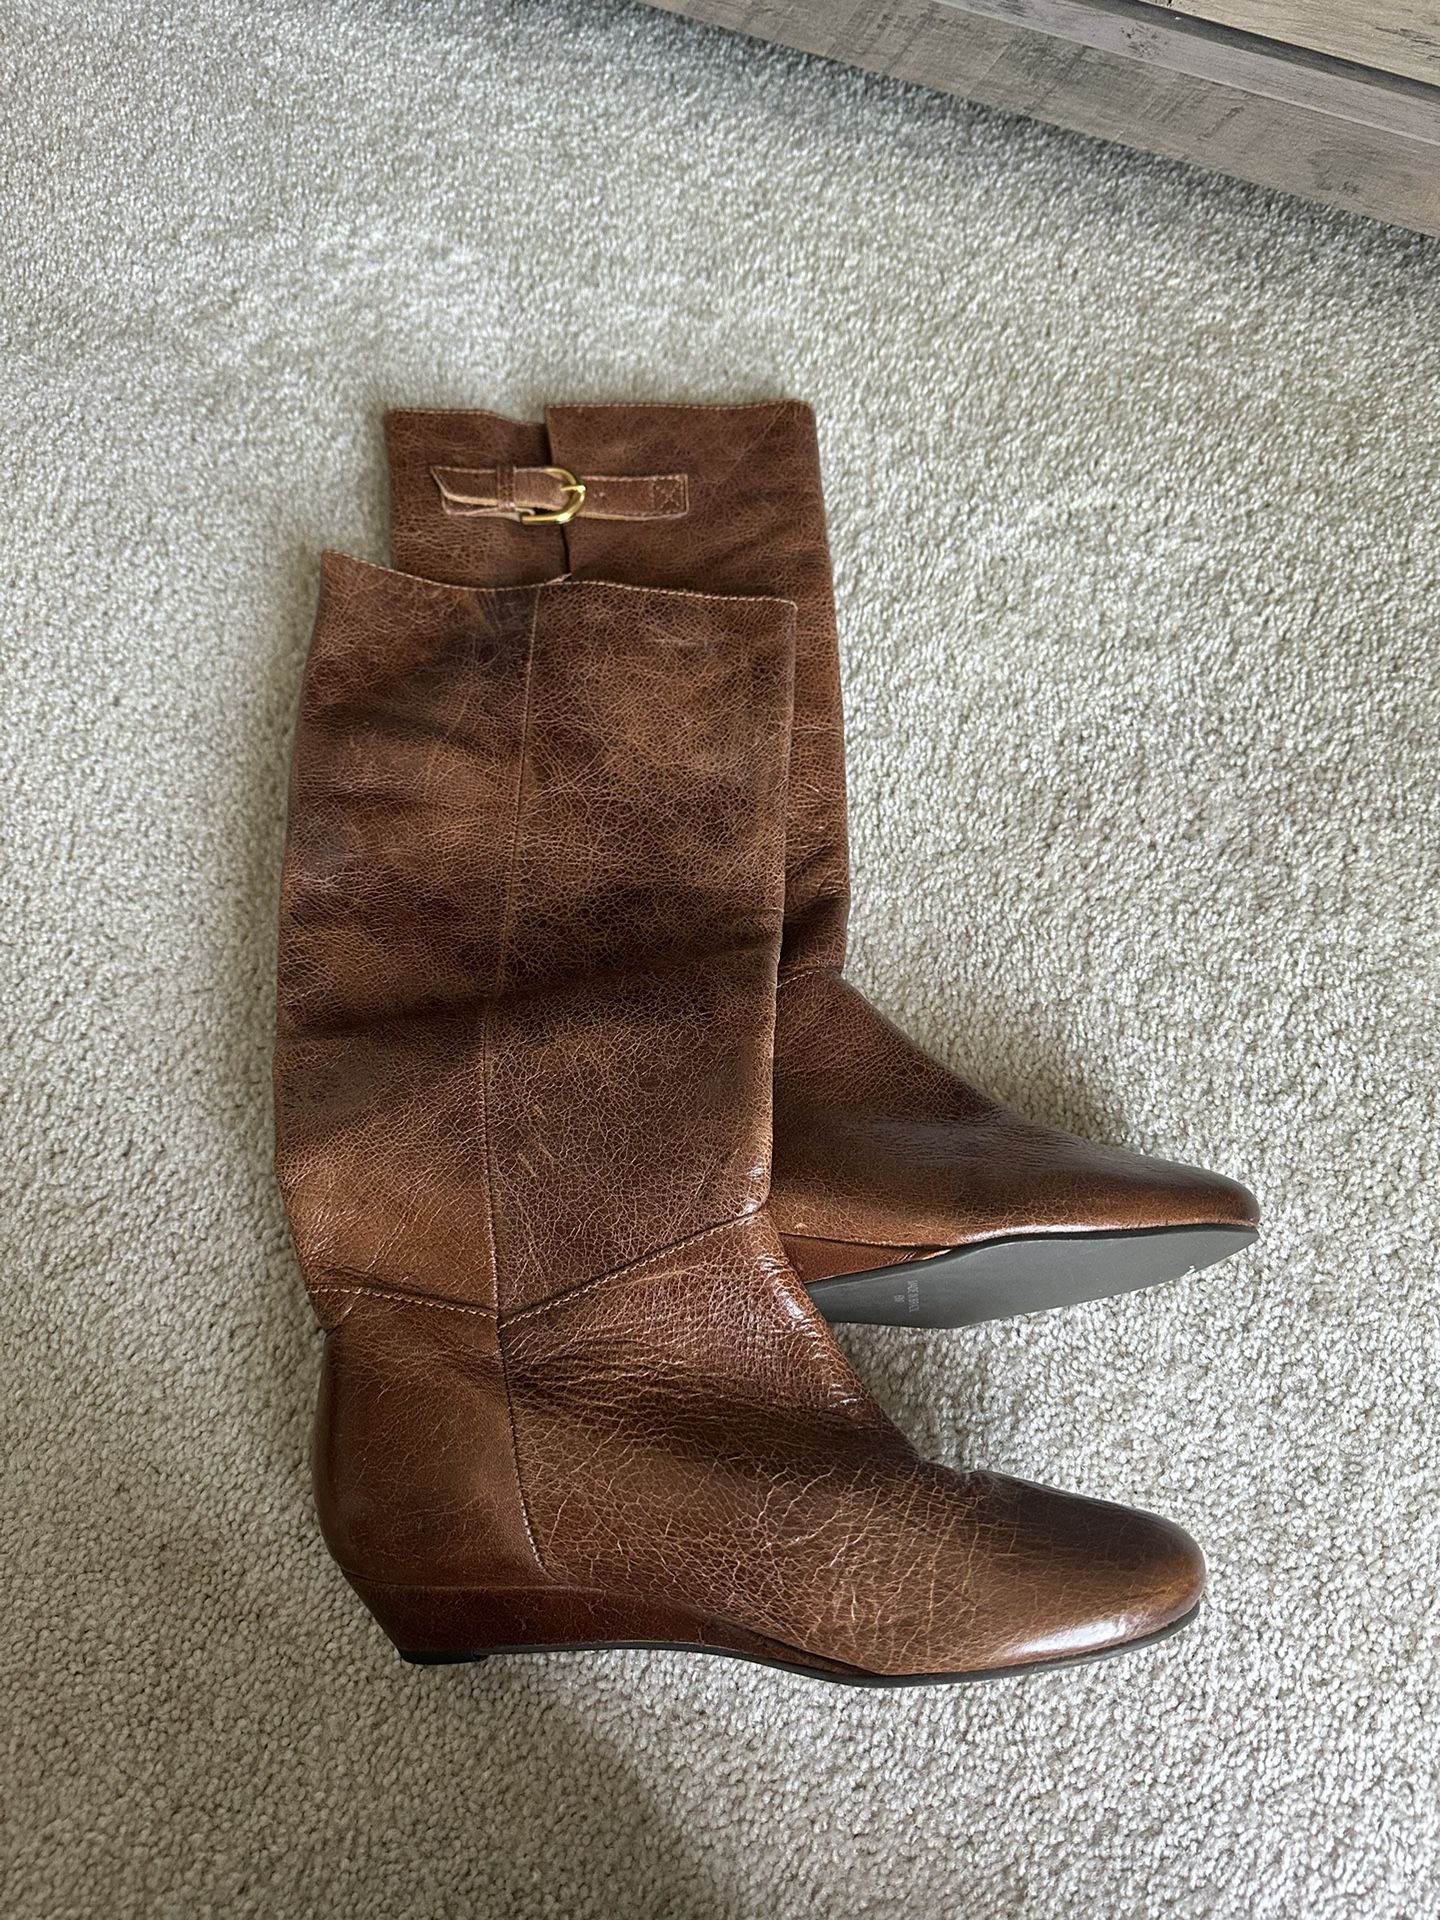 Steve Madden Intyce boots Size 6 NEW